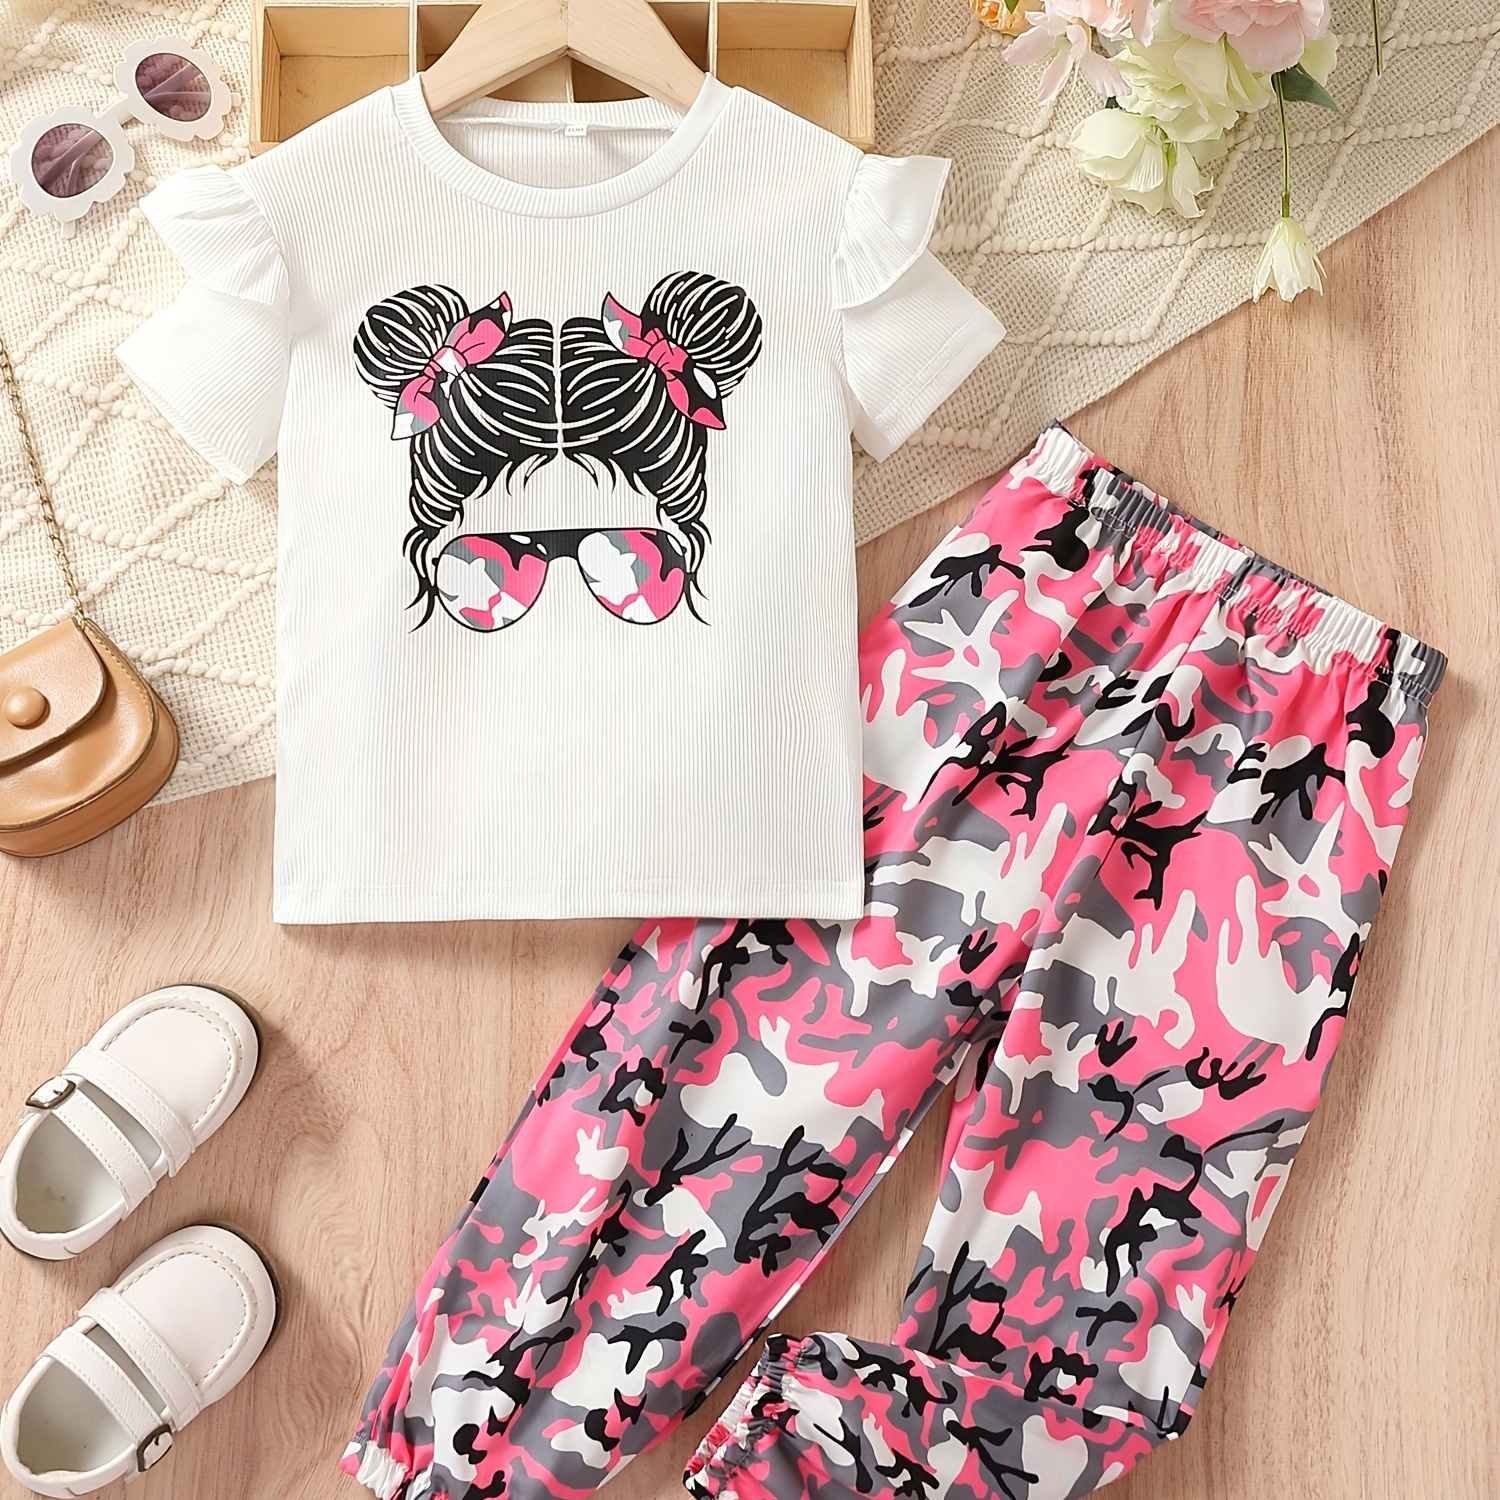 

Girl's 2pcs T-shirt & Elastic Waist Pants Set, Sunglasses Girl Print Short Sleeve Top, Camouflage Print Casual Outfits, Kids Clothes For Summer